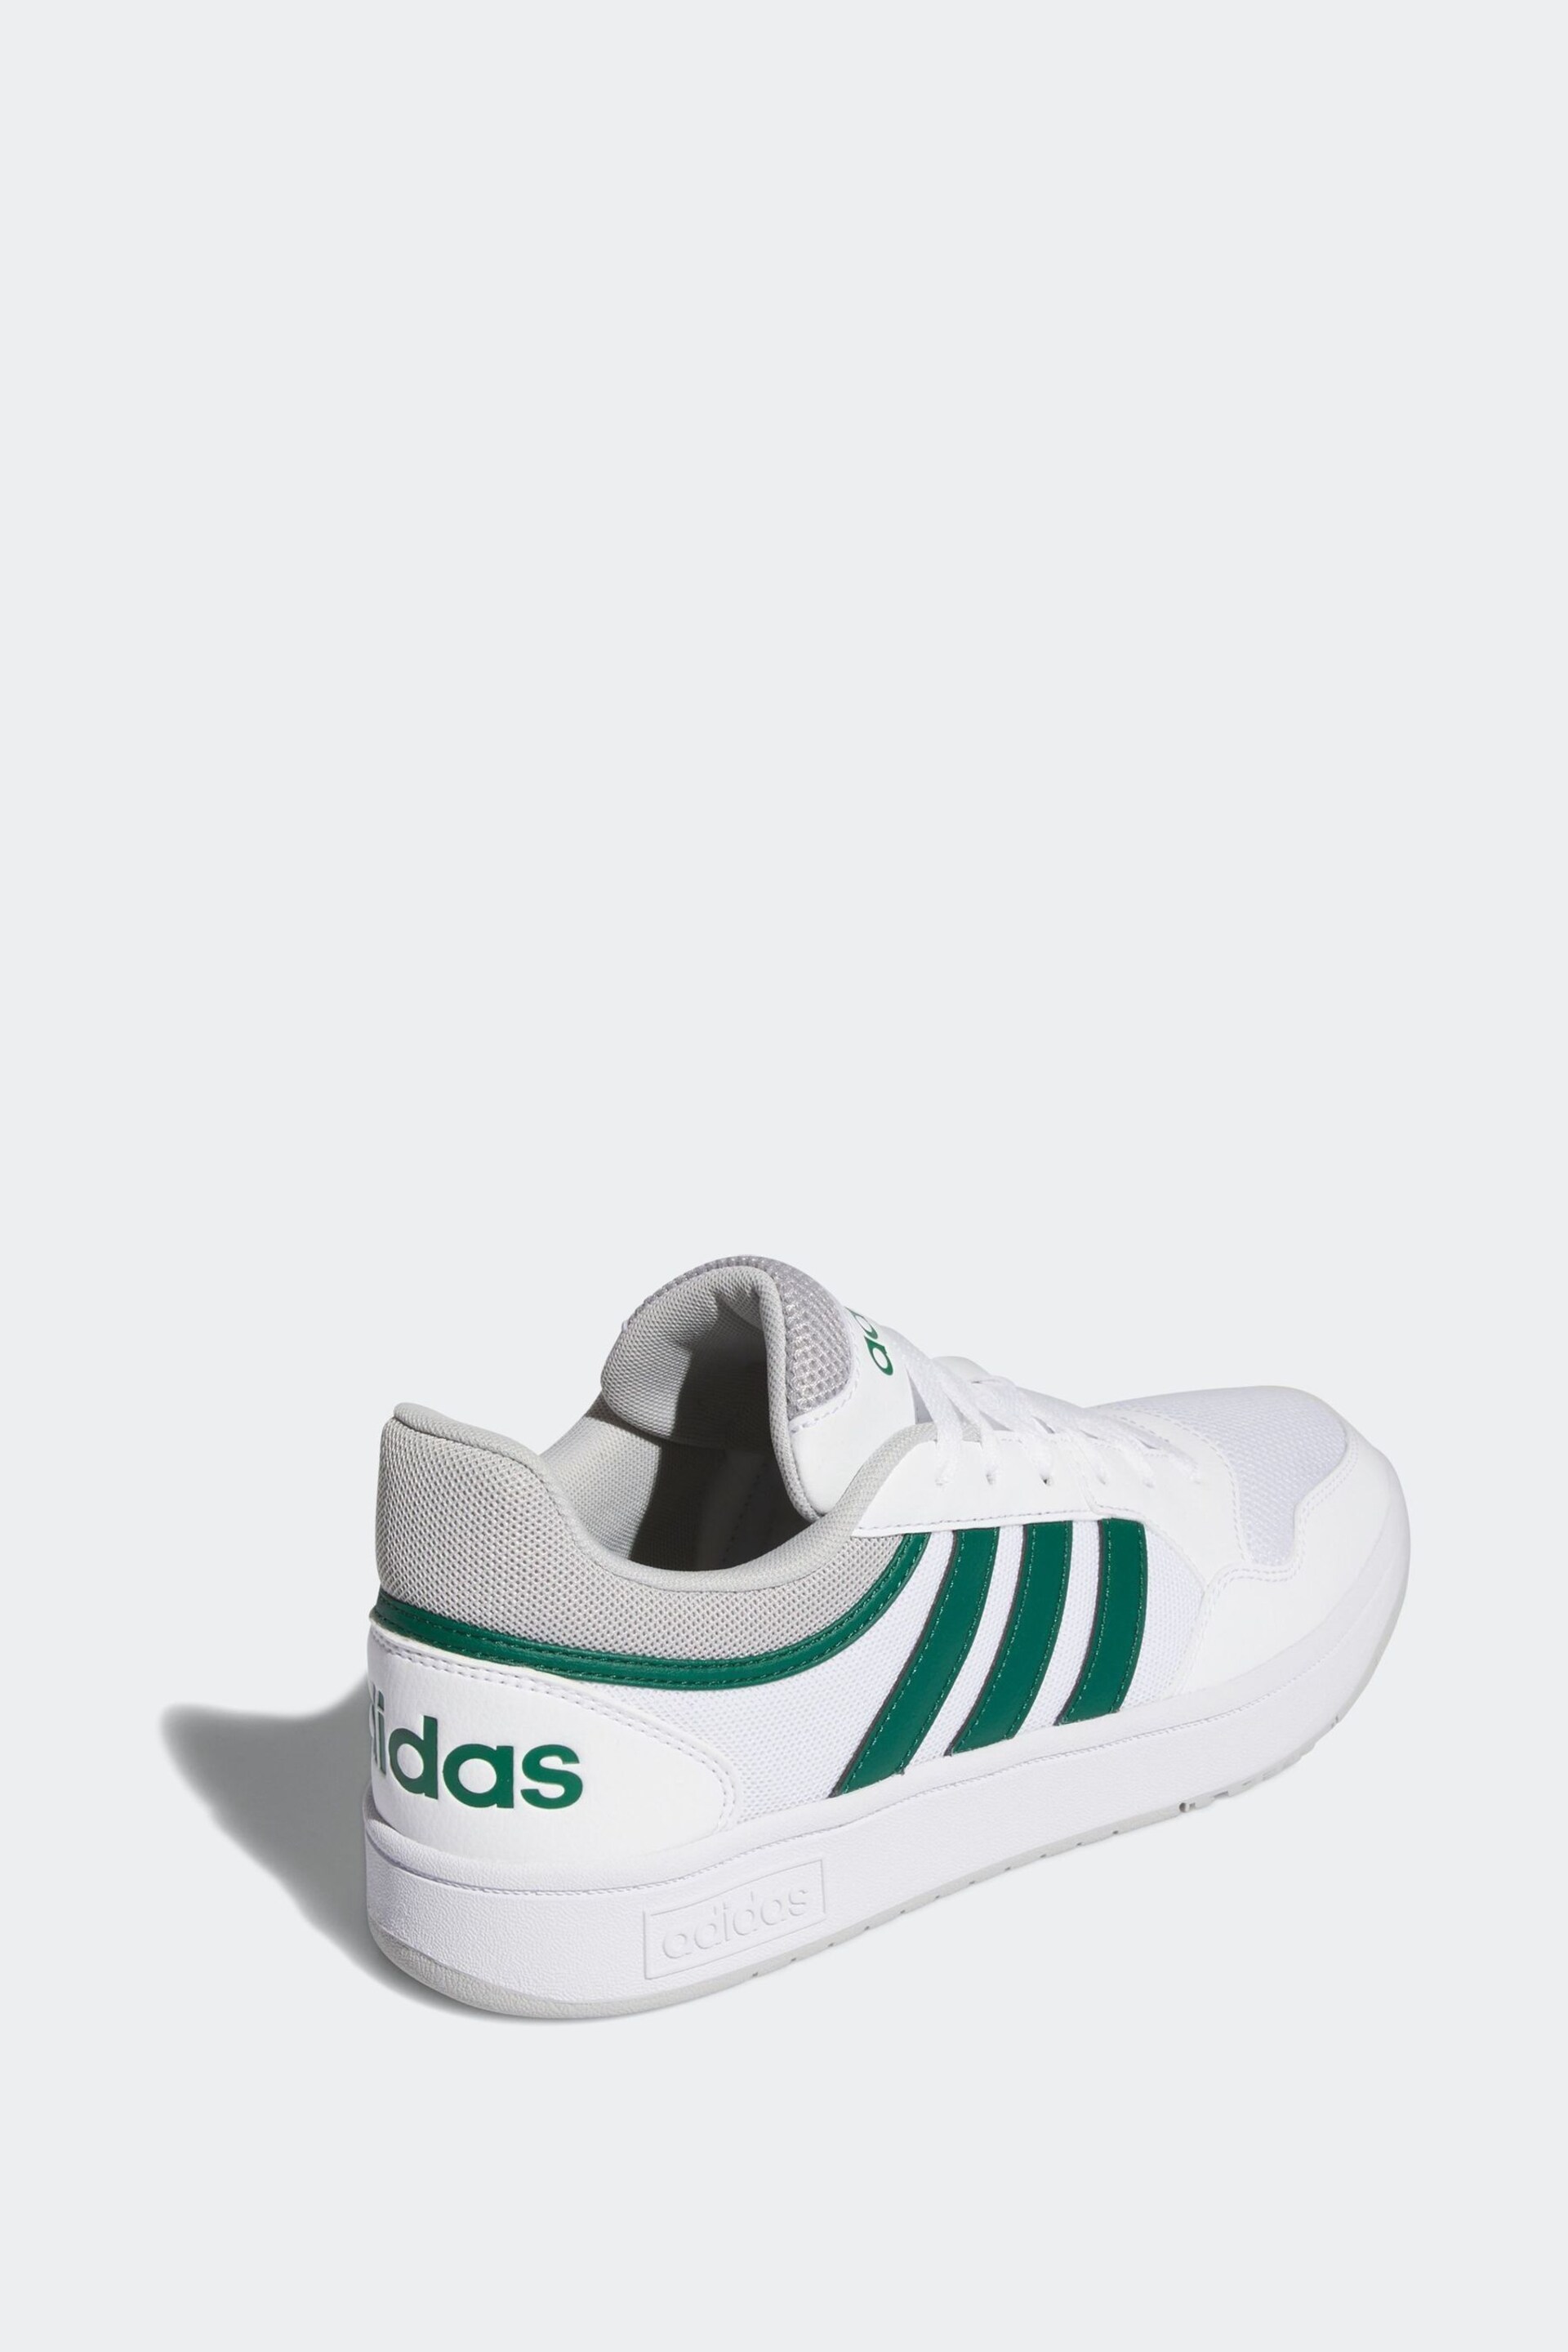 adidas Originals White Hoops 3.0 Summer Trainers - Image 4 of 9